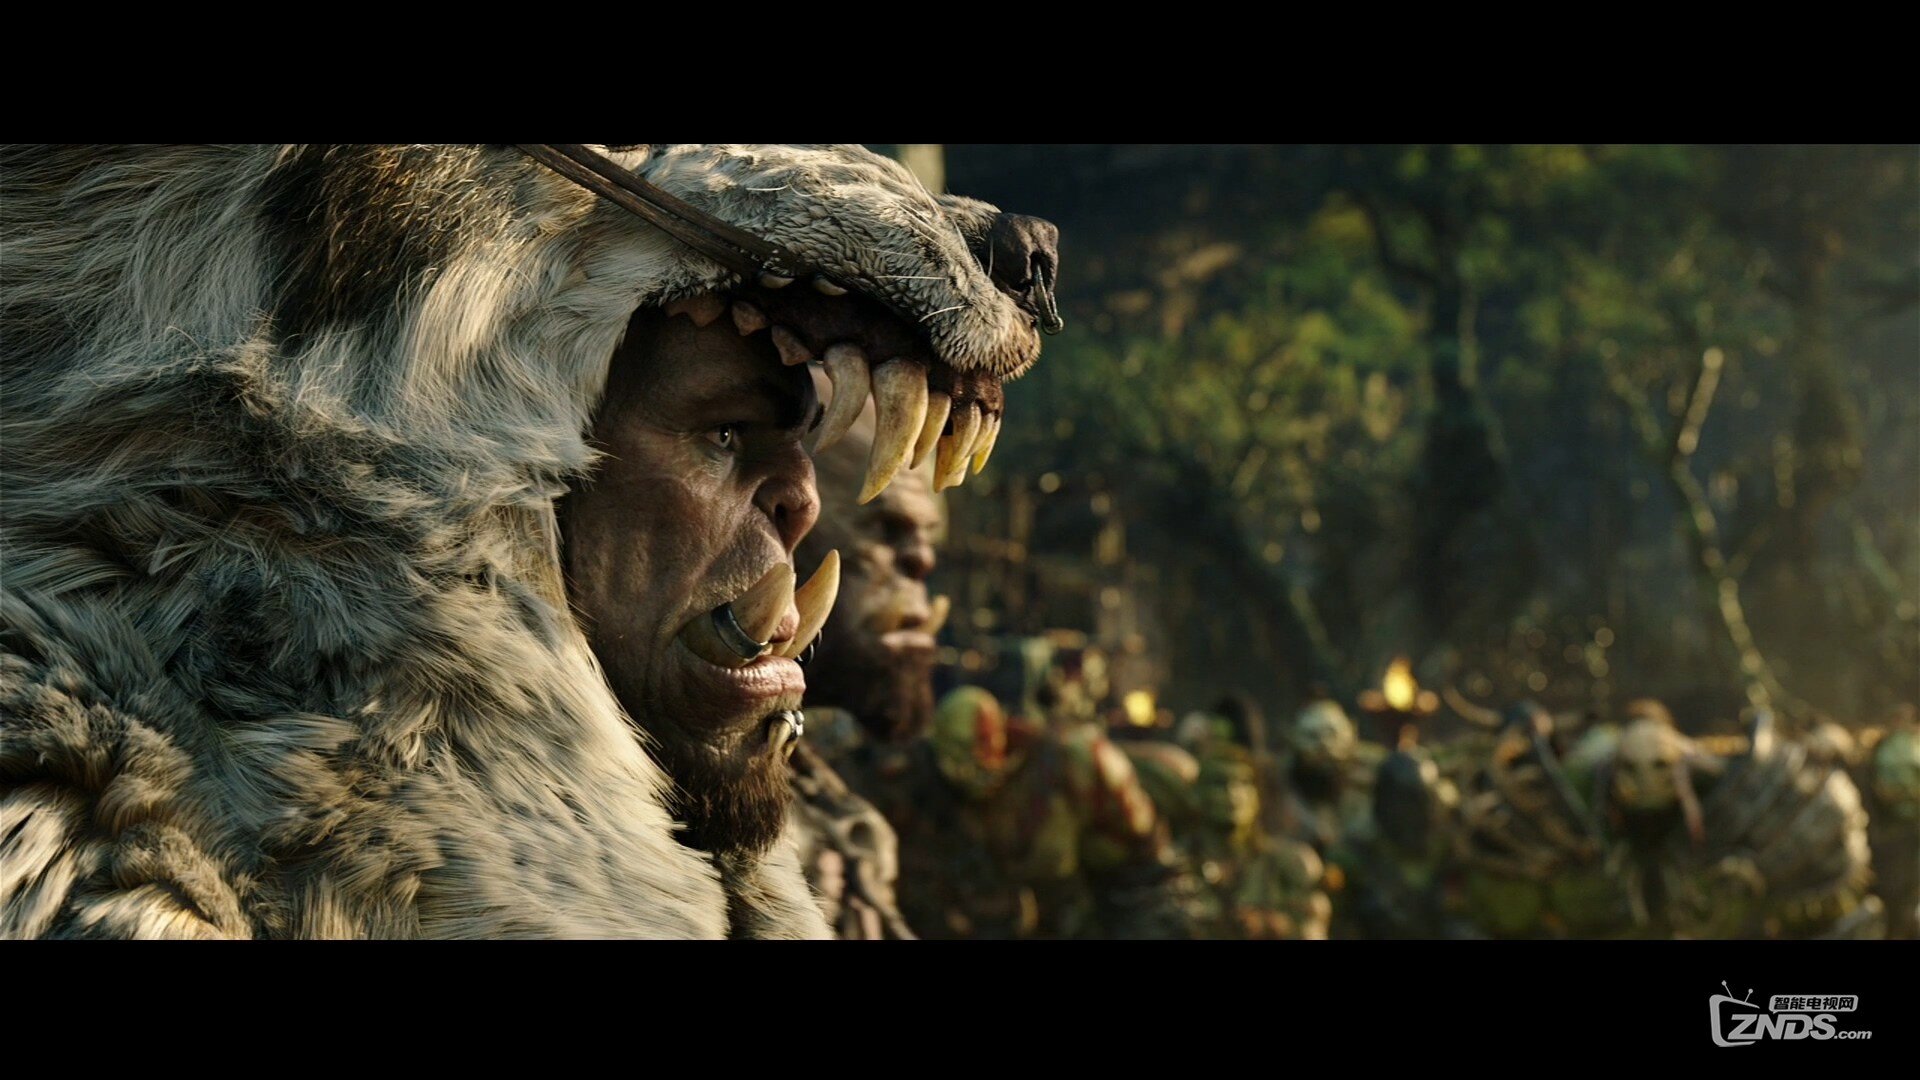 Warcraft_Trailer1_Texted_Stereo_PCM_1080p.mov_20160214_211904.875.jpg